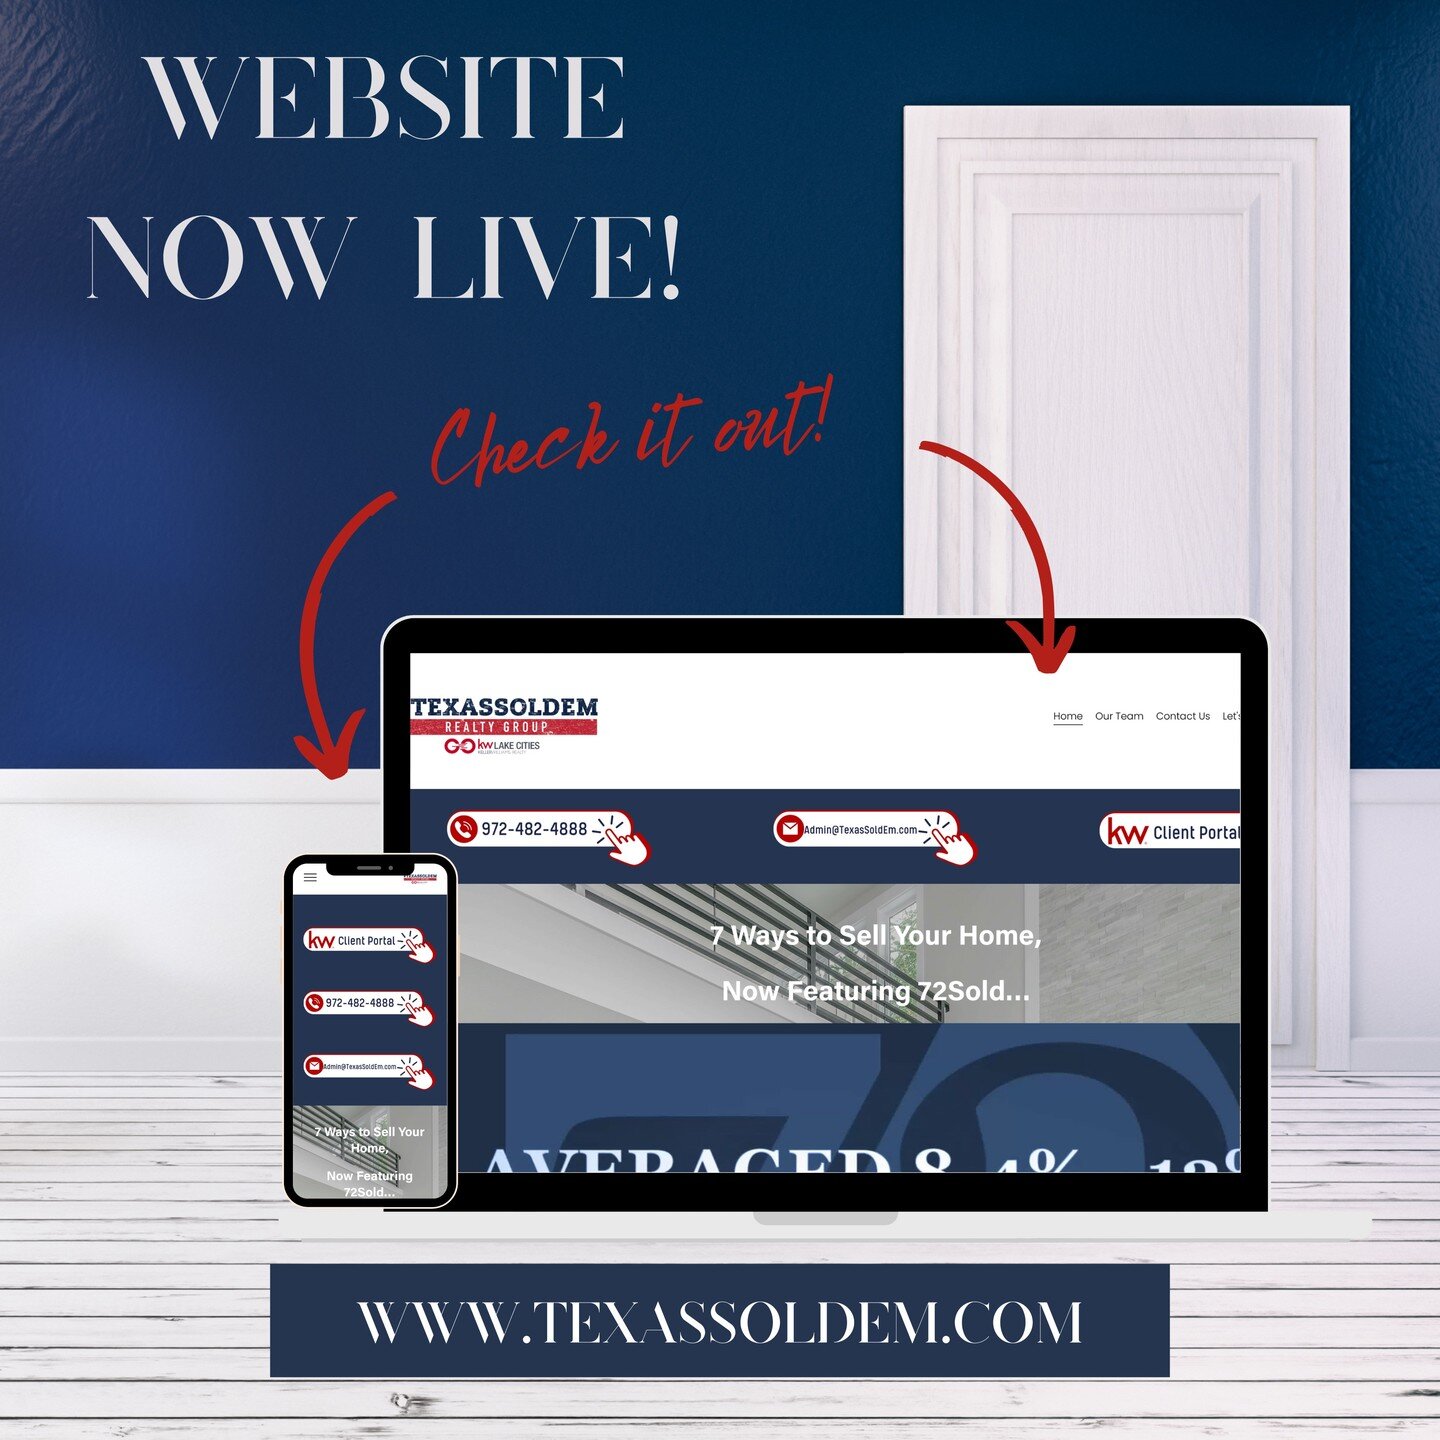 We are thrilled to announce the official launch of our new website! Check out our newly designed site and all the awesome features waiting to be discovered. www.TexasSoldEm.com #WebsiteLaunch #NewFeatures #CheckItOut #realestate #realtor #kellerwilli